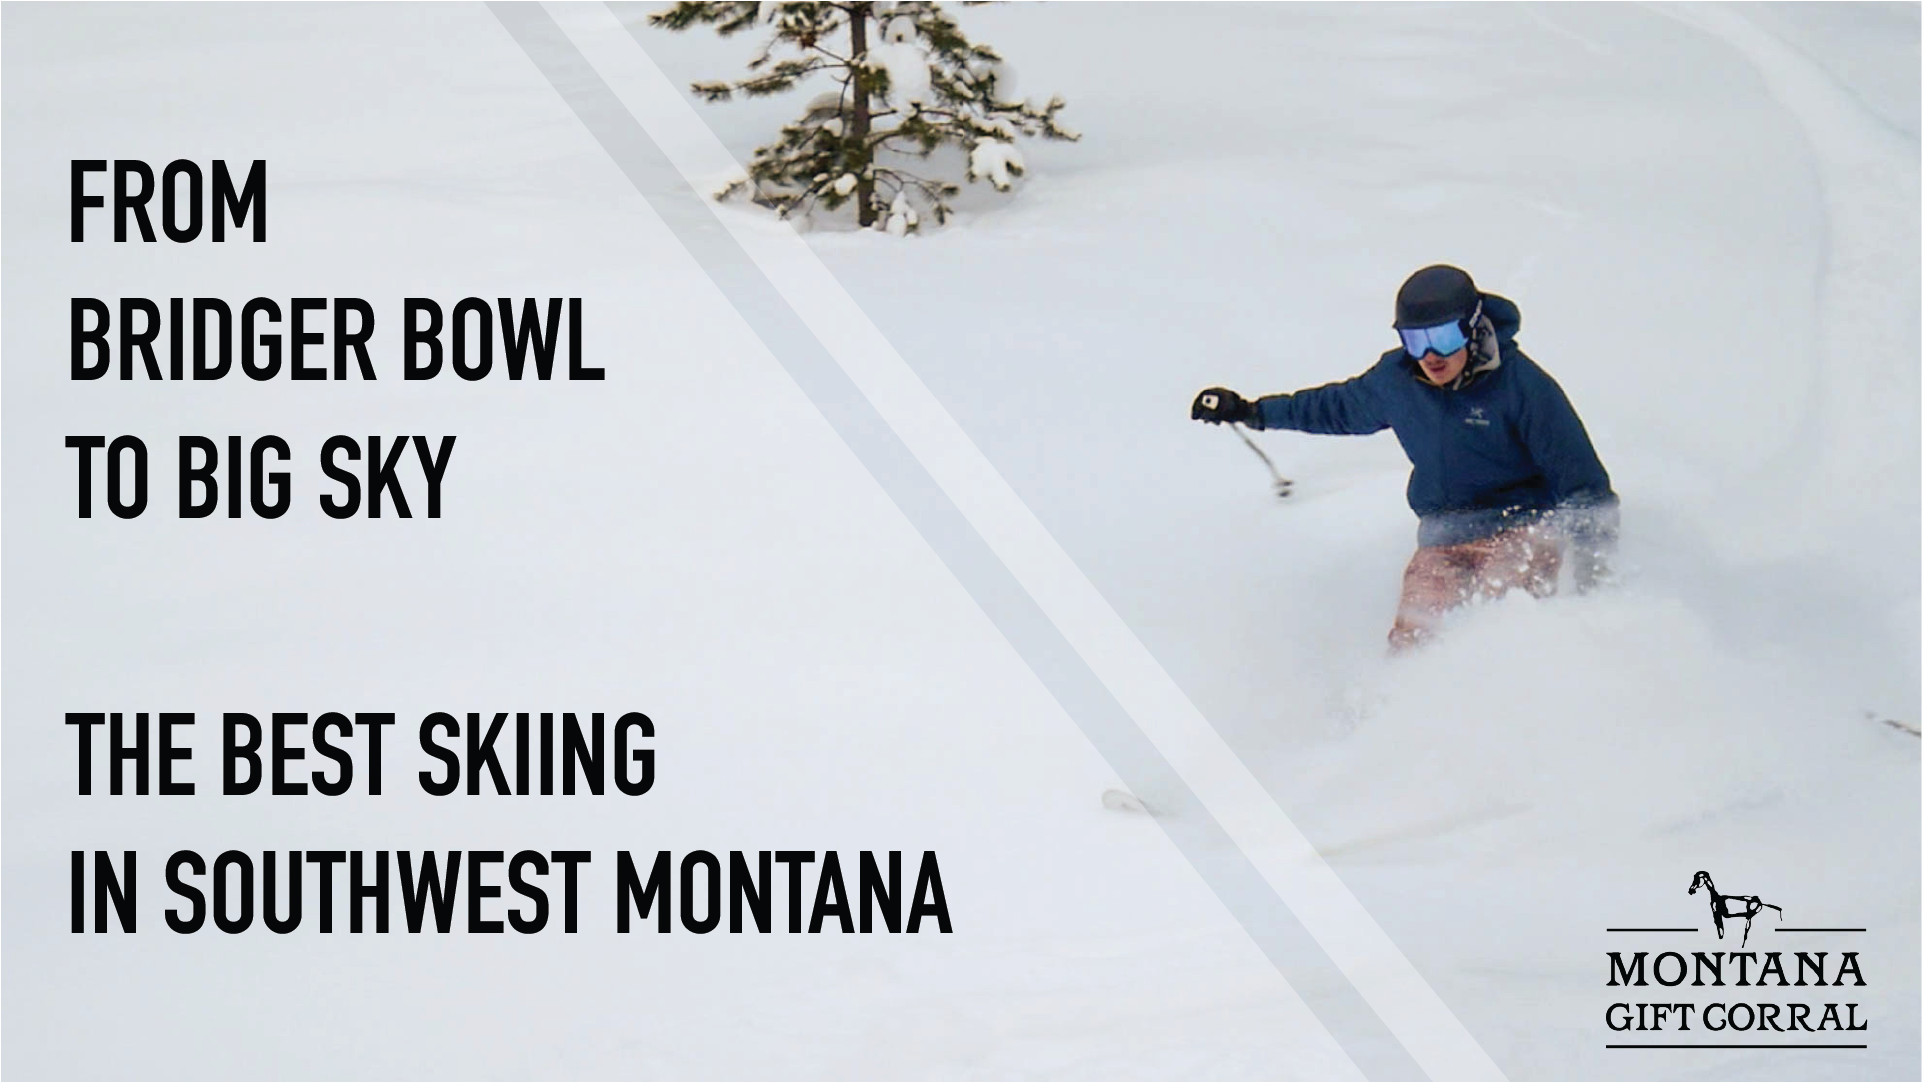 Best Skiing in Southwest Montana: From Bridger Bowl to Big Sky